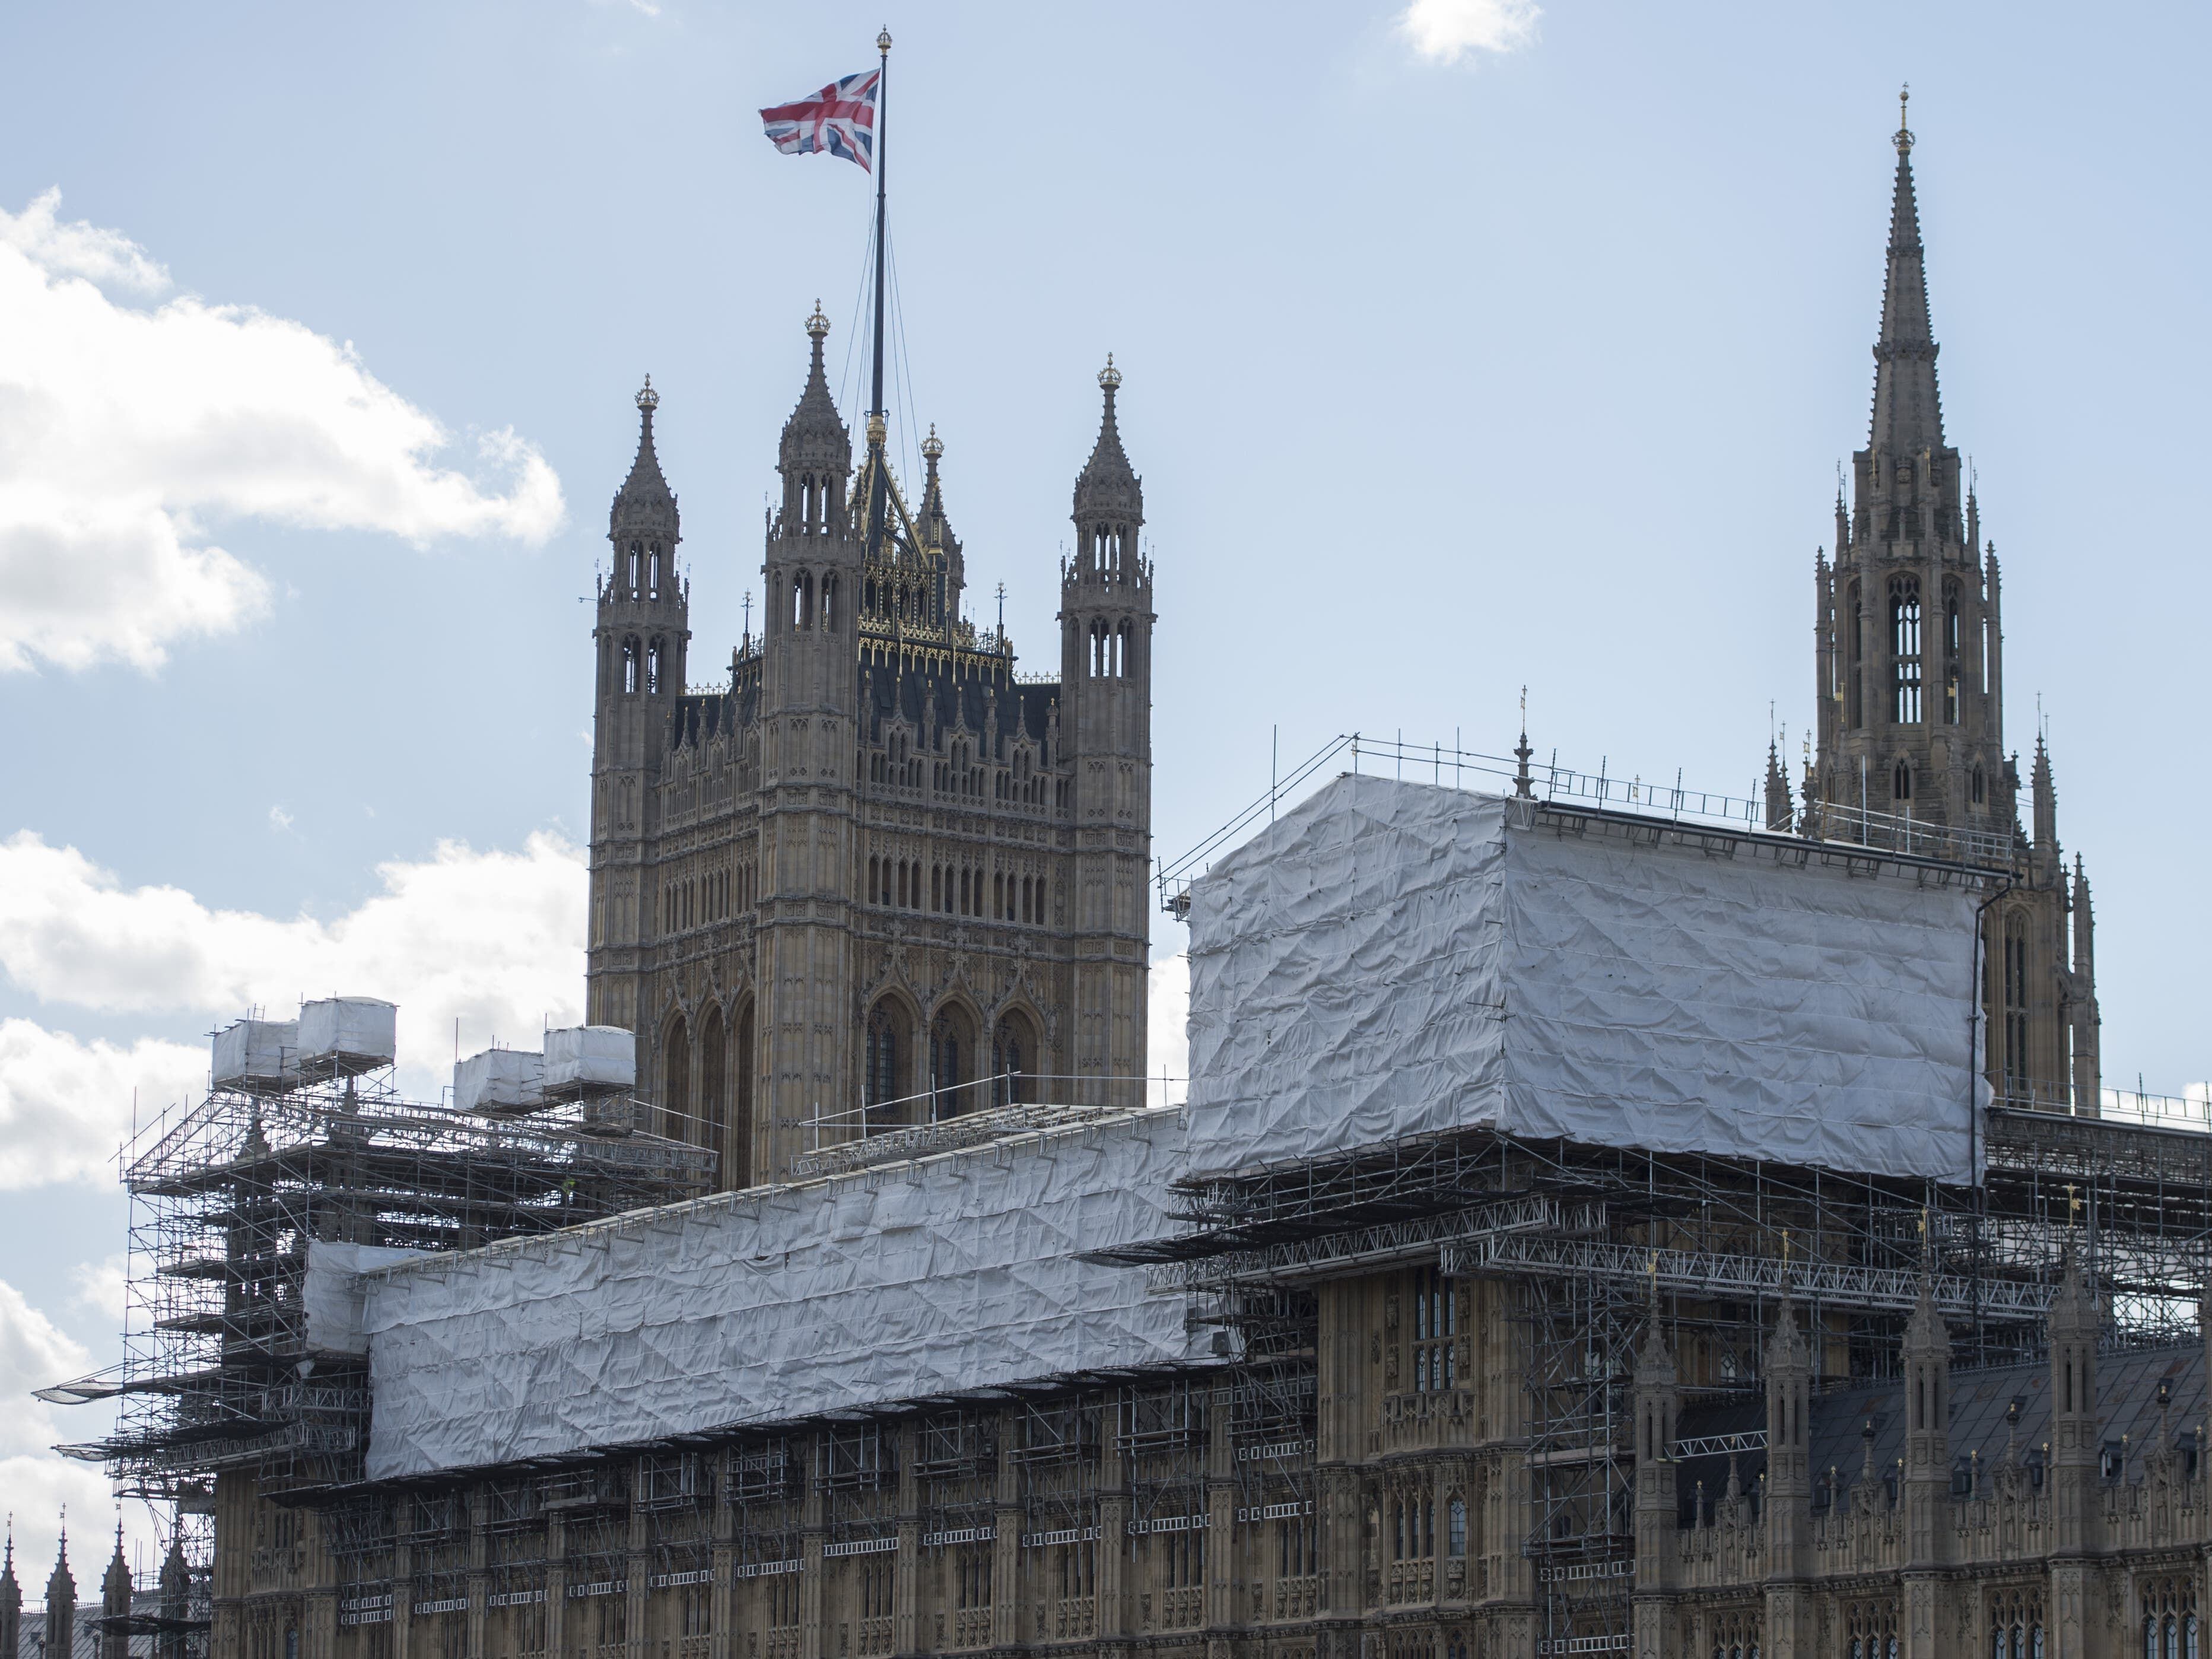 MPs call for quicker action to repair Parliament amid warnings of fires